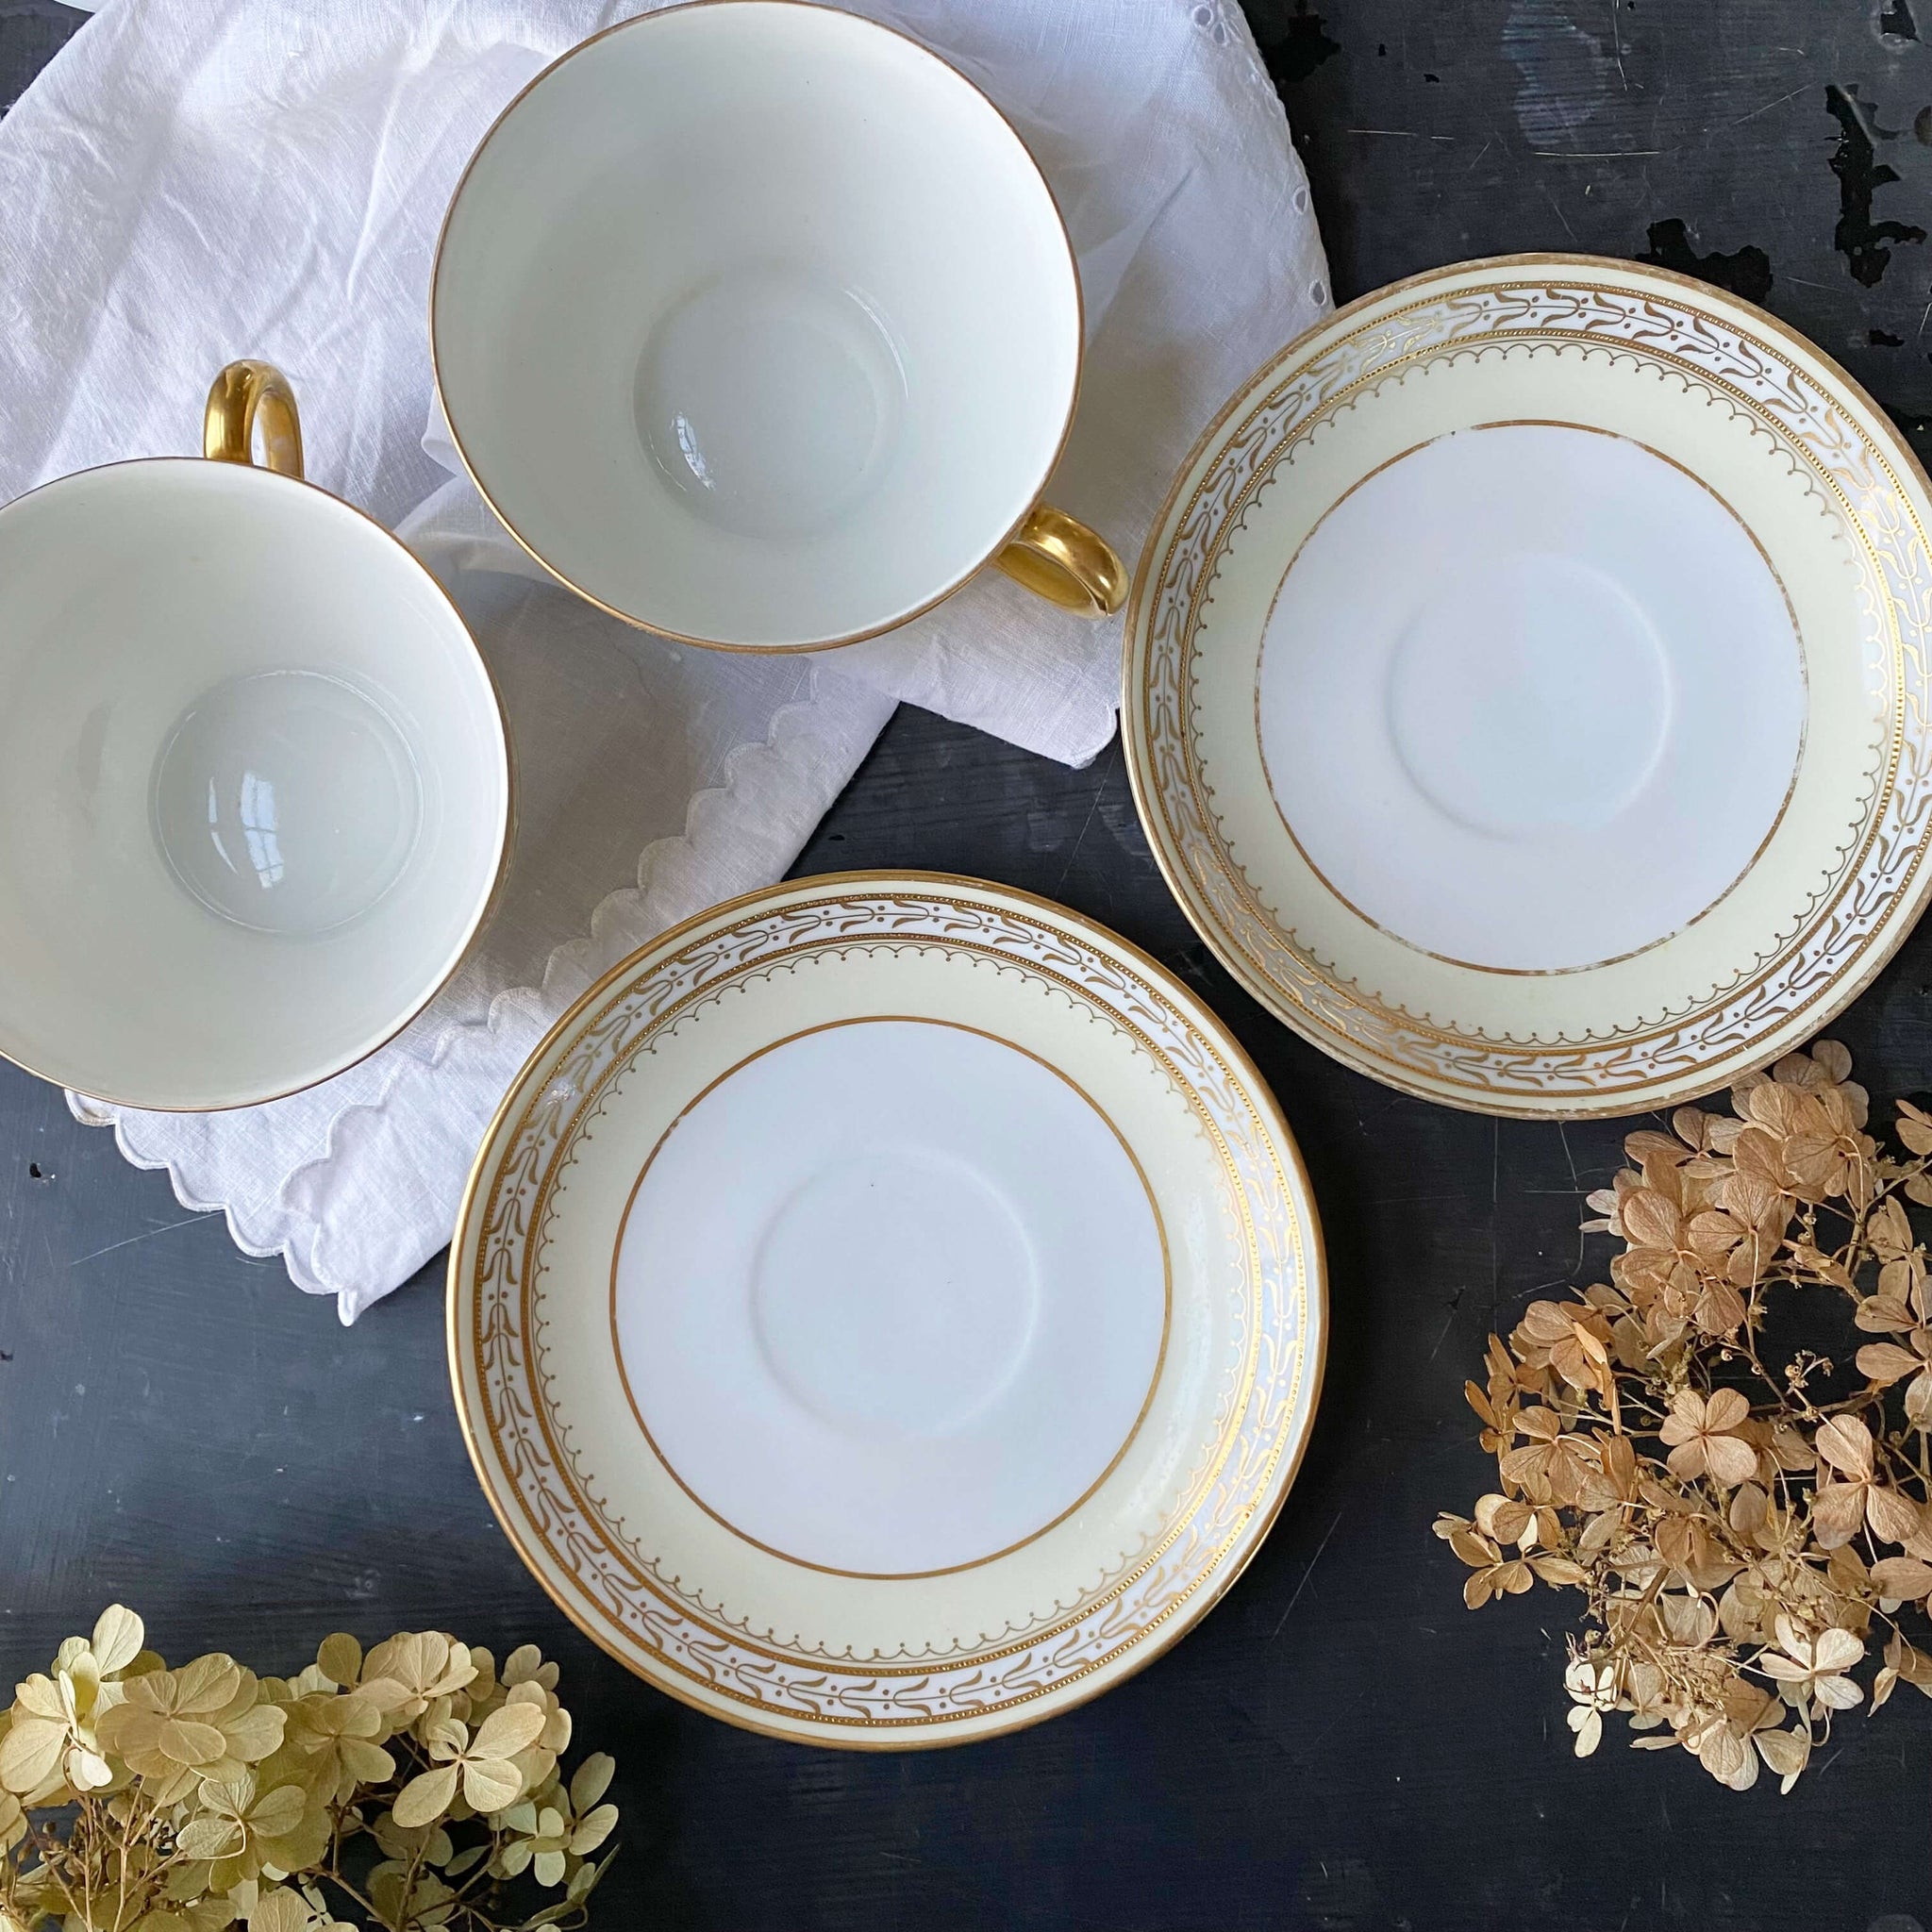 Antique Noritake Chanfaire Porcelain Cups and Saucers - Set of Two circa 1918